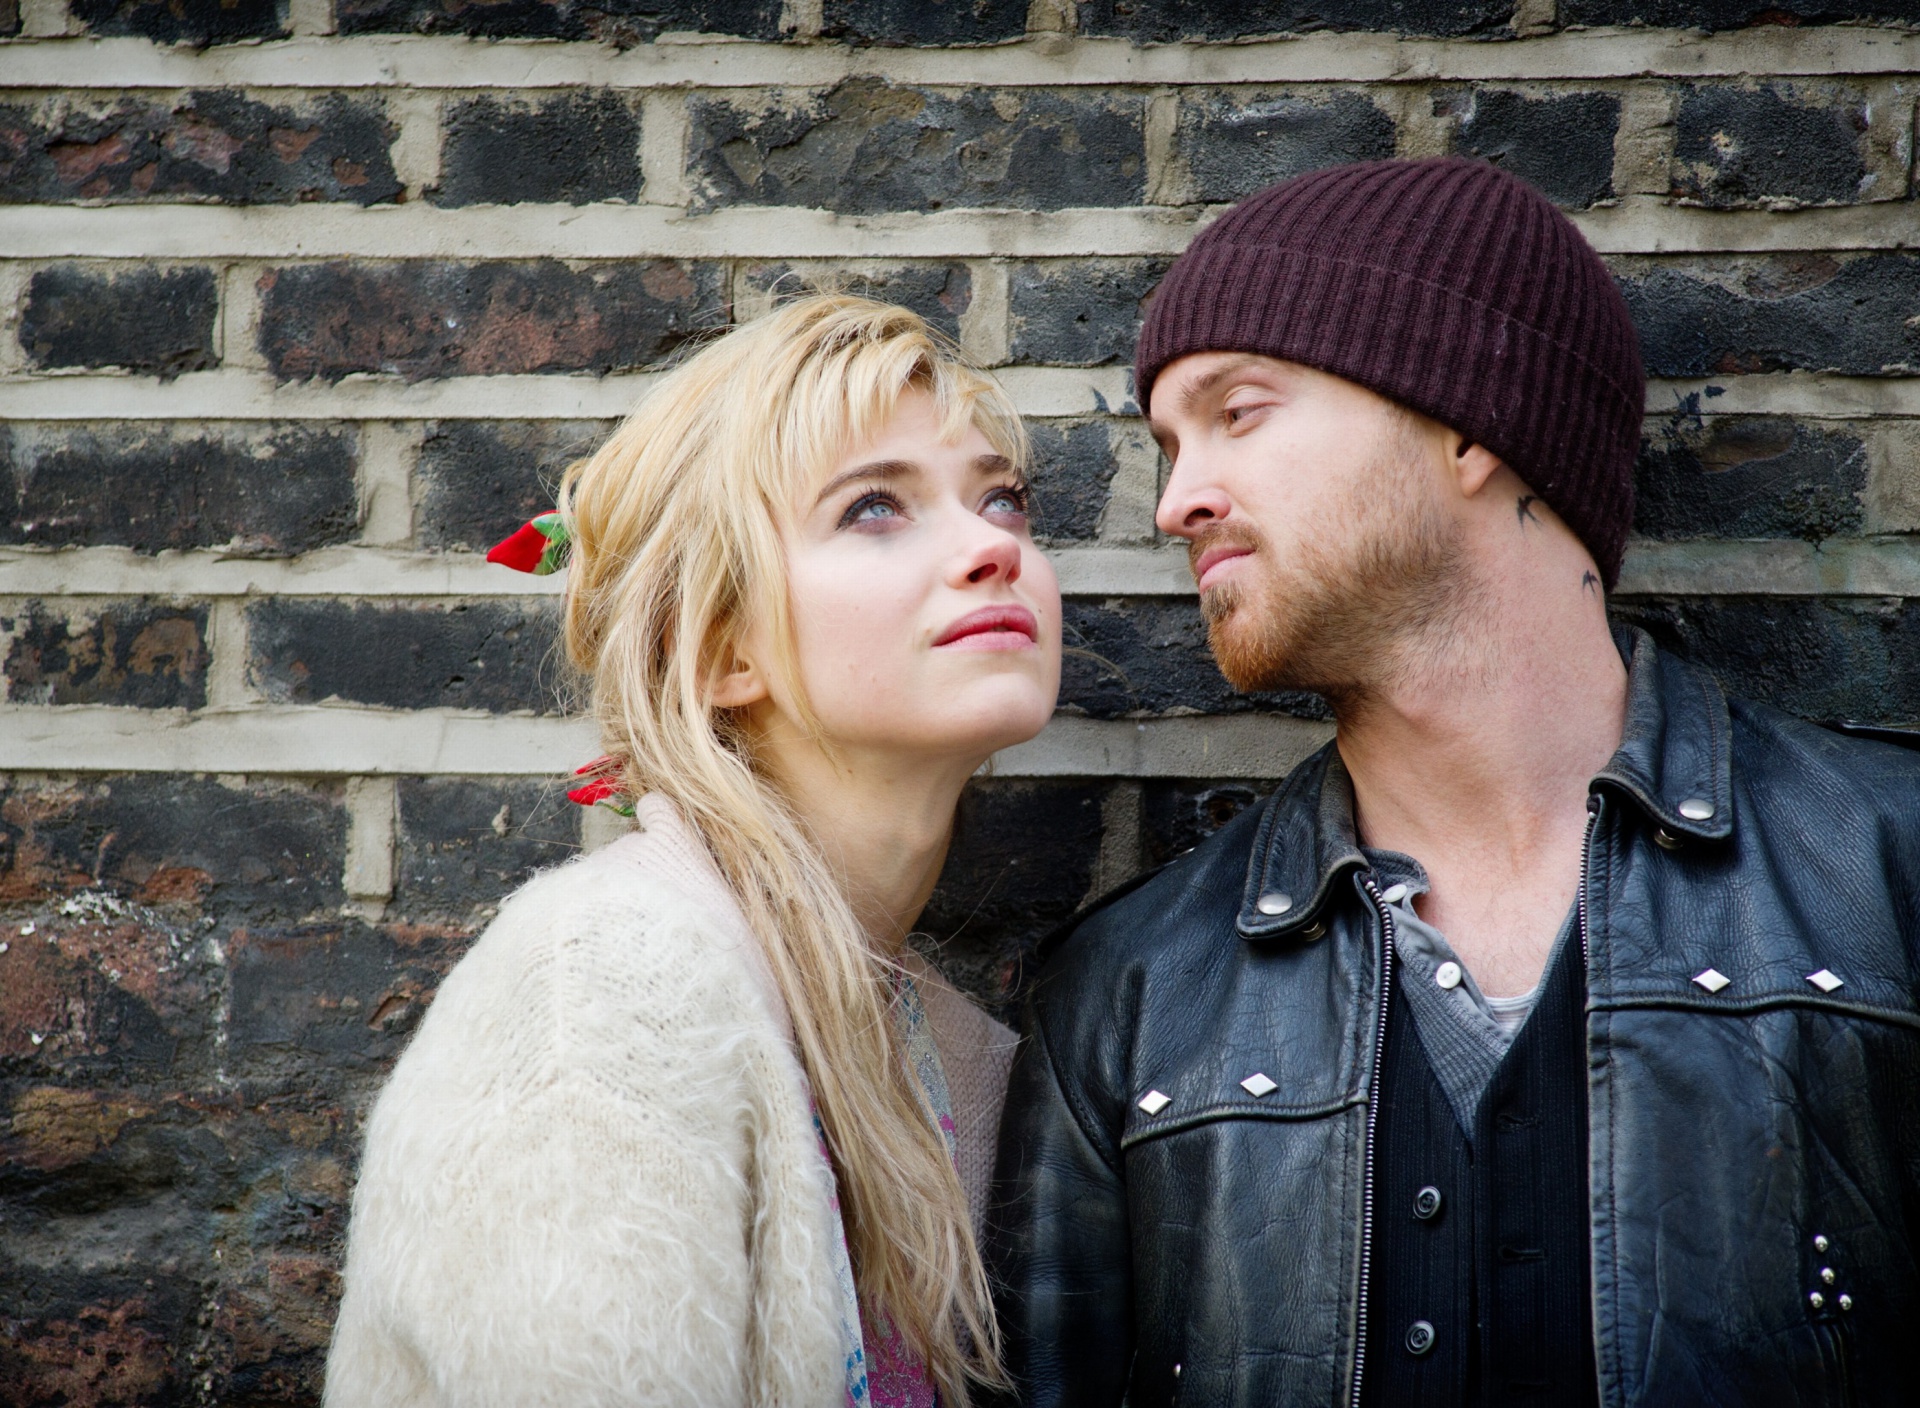 A Long Way Down with Aaron Paul and Imogen Poots screenshot #1 1920x1408